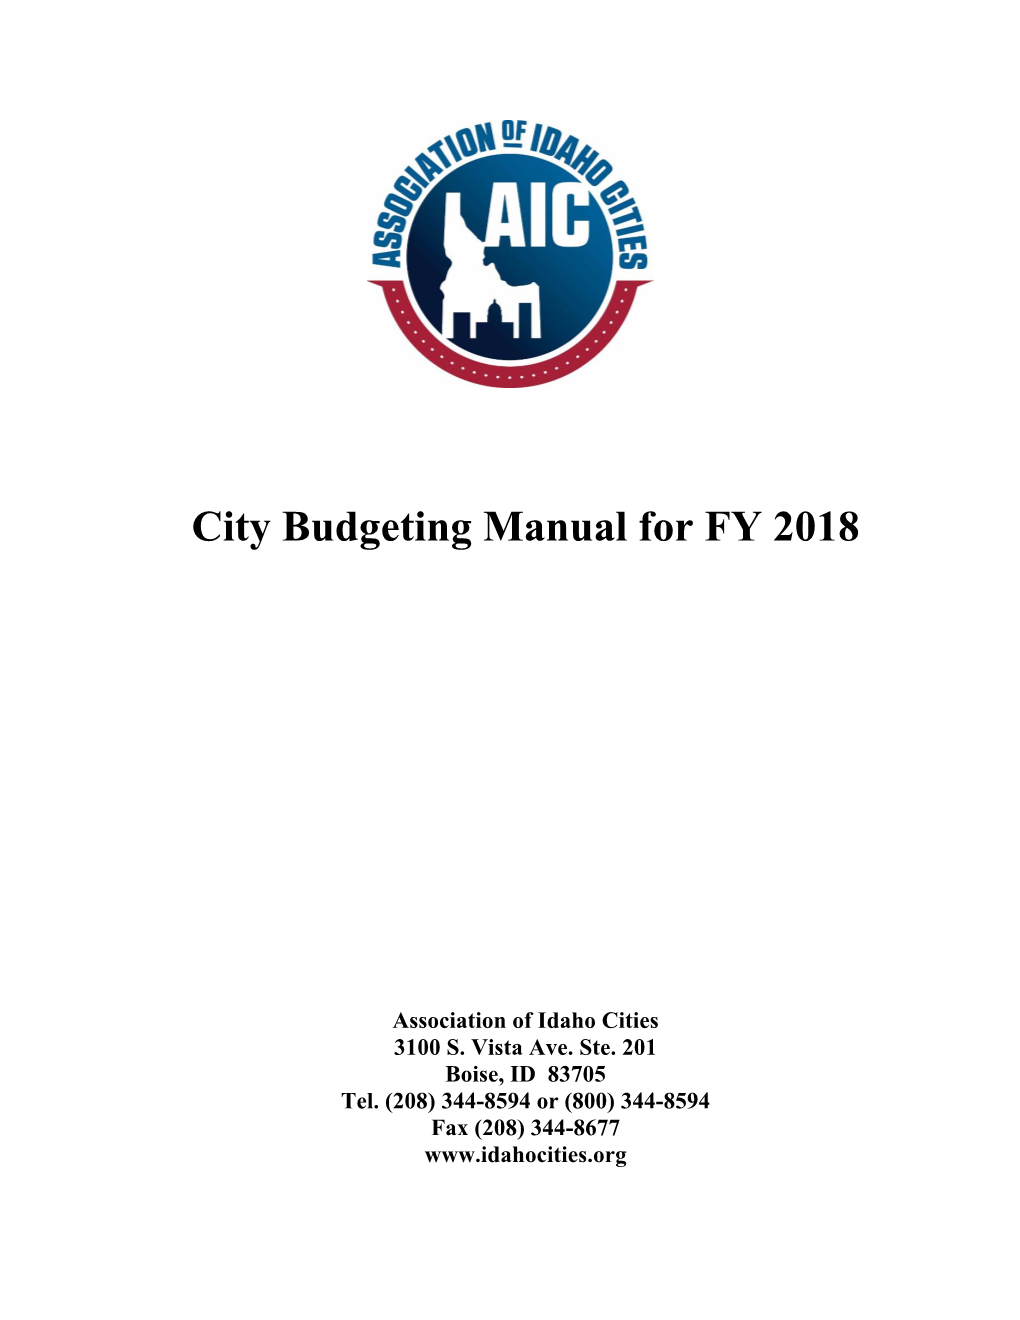 City Budgeting Manual for FY 2018